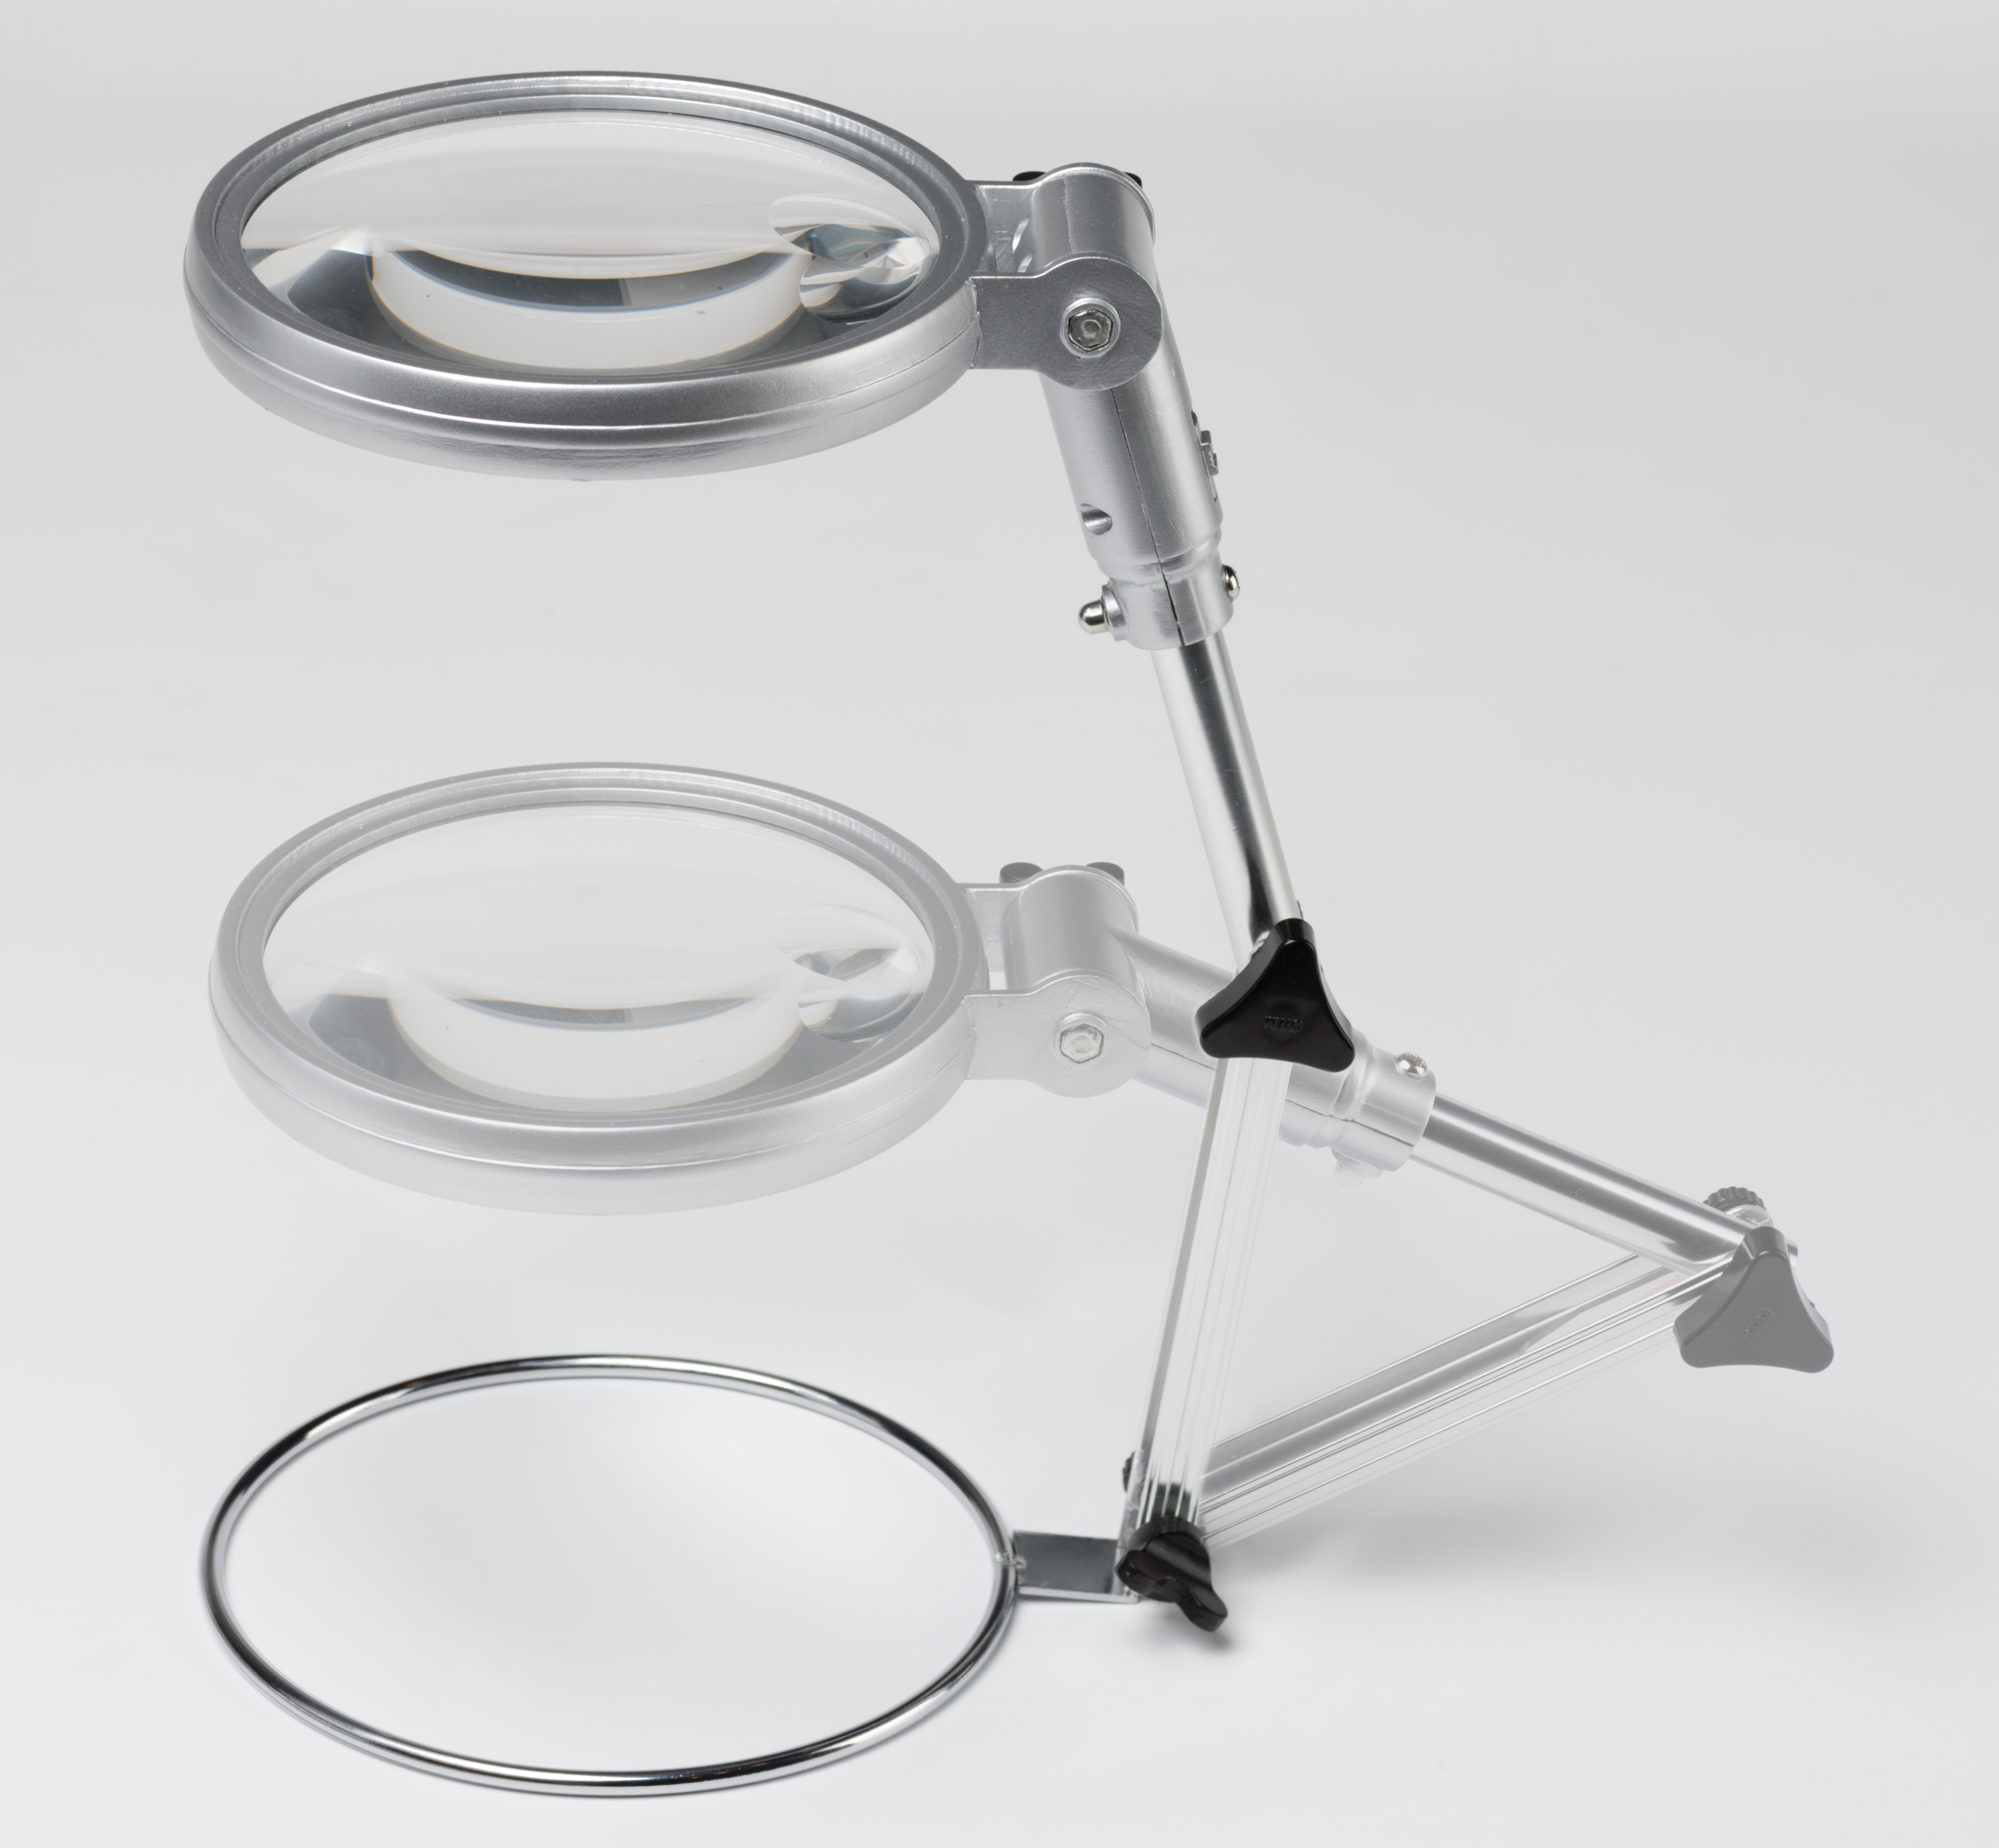 BRESSER Sewing Magnifier 2x/4x with LED Illumination, Diameter 120 mm